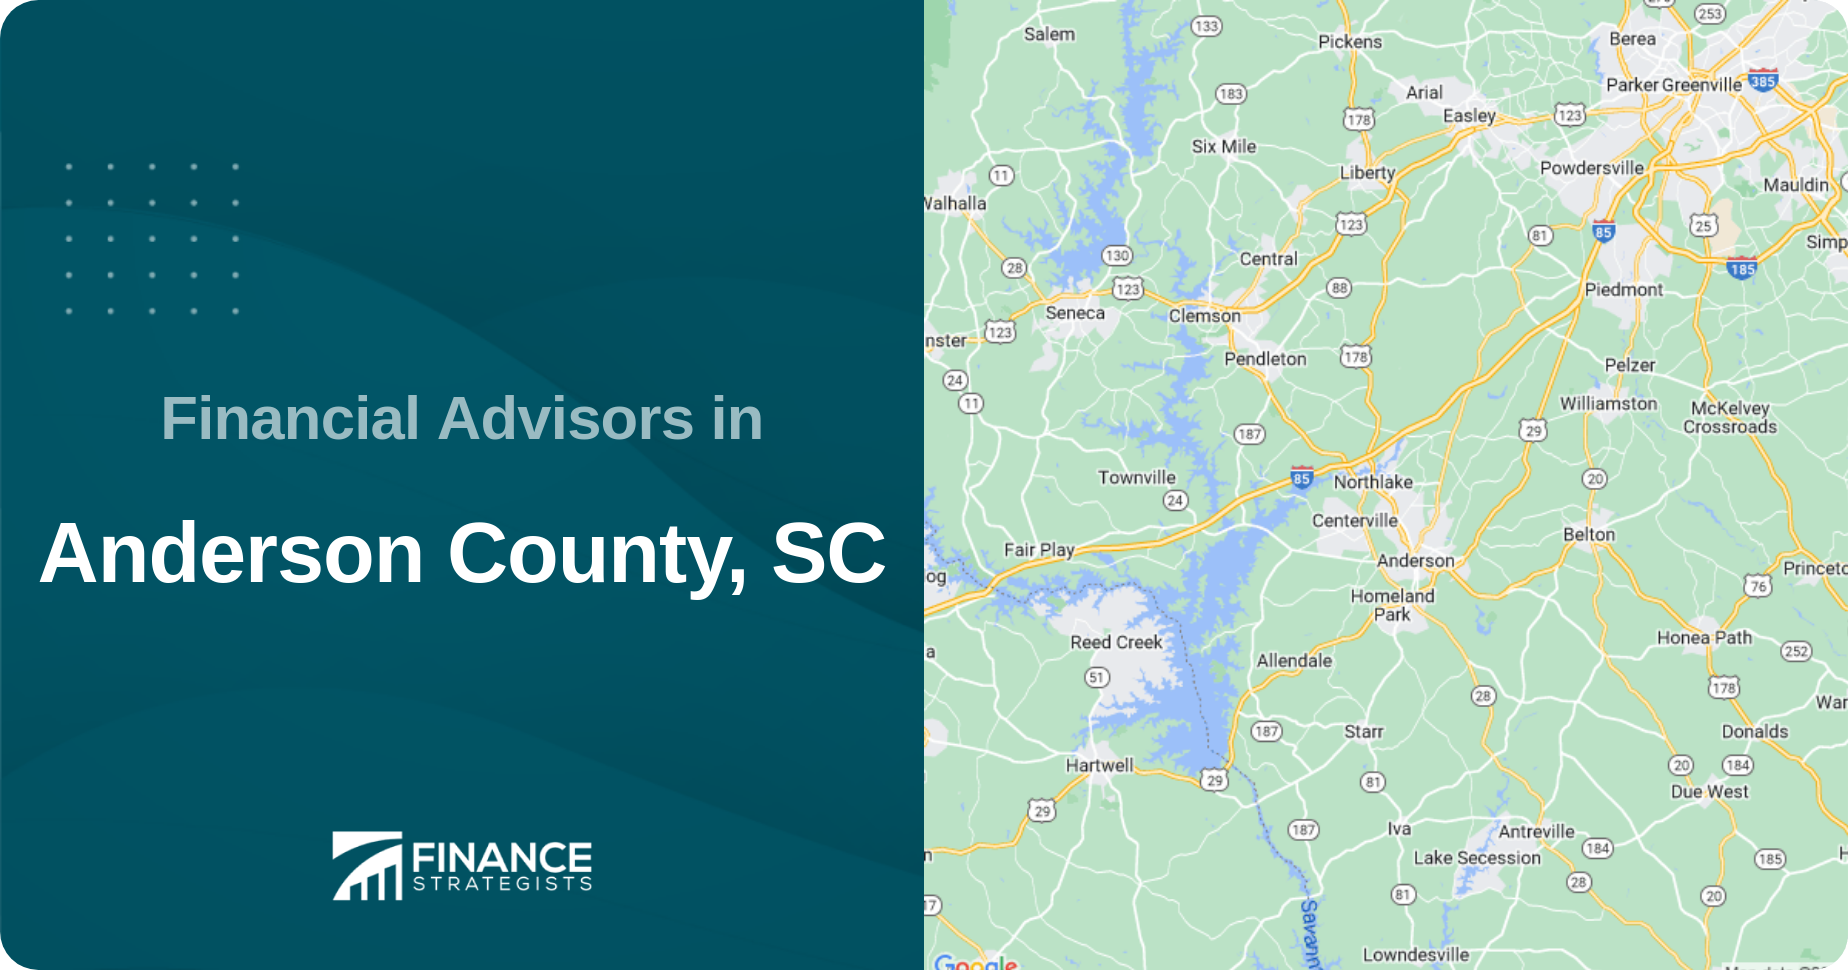 Financial Advisors in Anderson County, SC